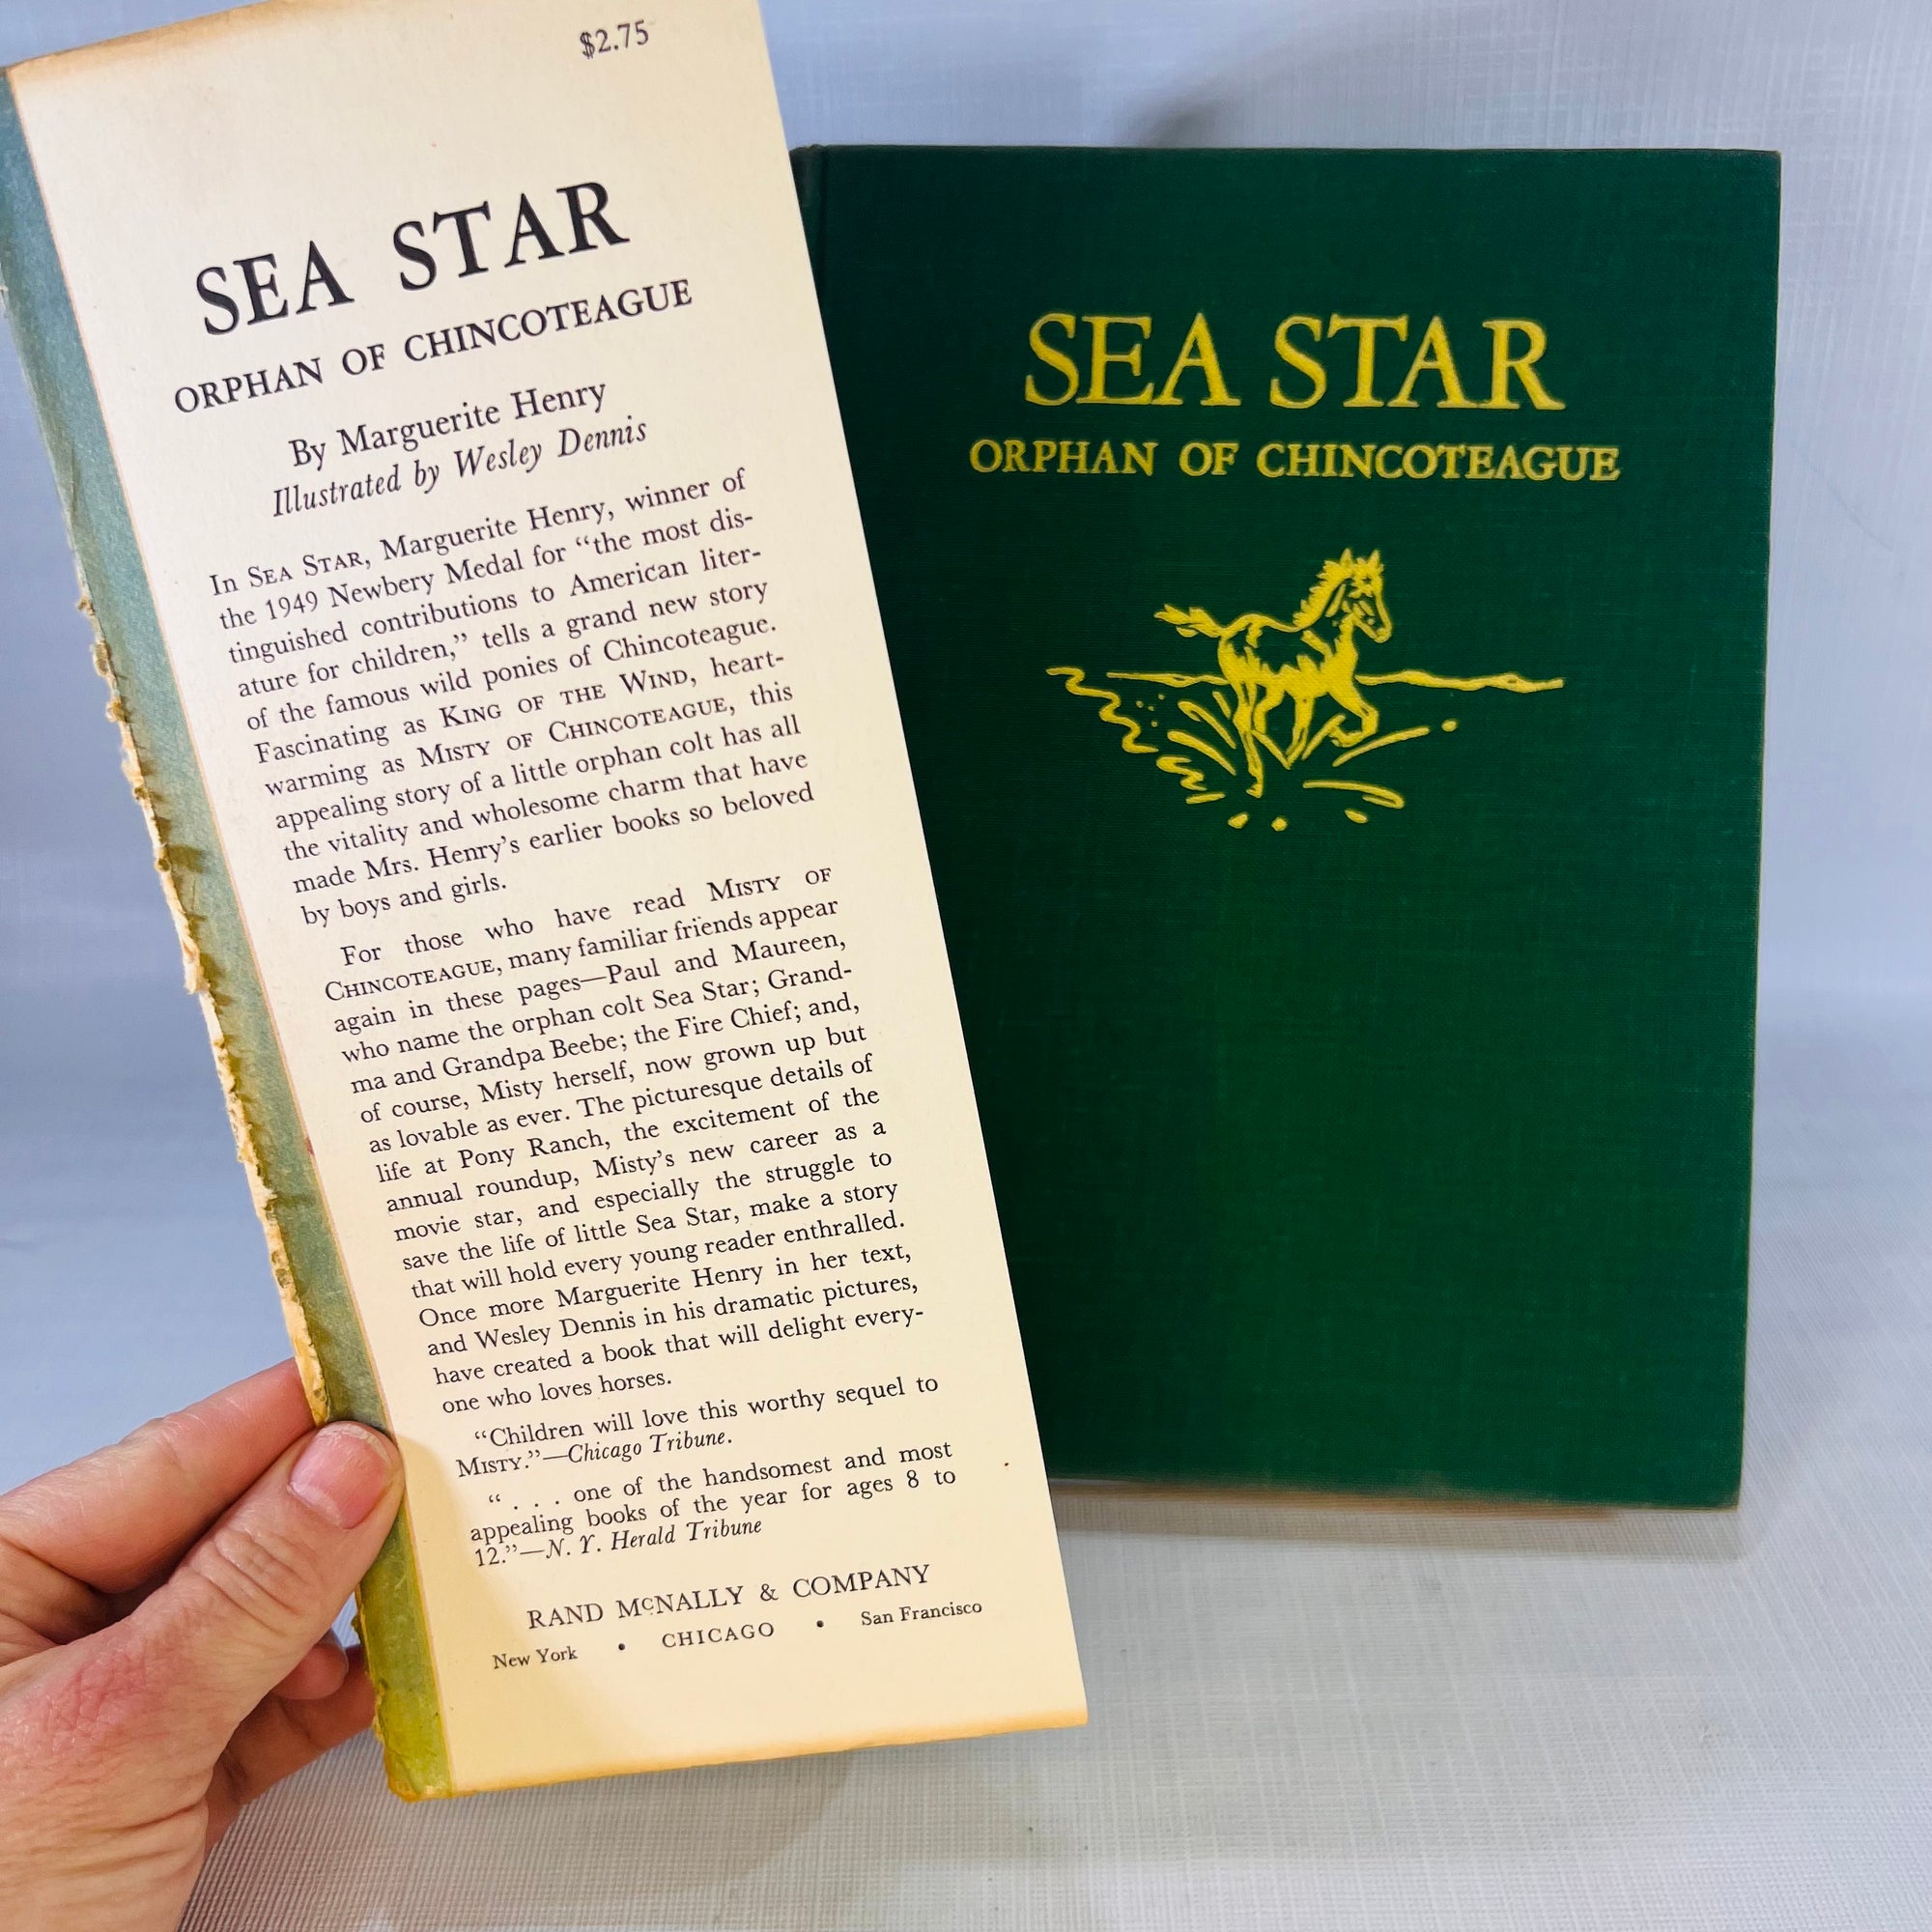 Sea Star Orphan of Chincoteague by Marguerite Henry illustrated by Wesley Denins 1950 Rand McNally & Co